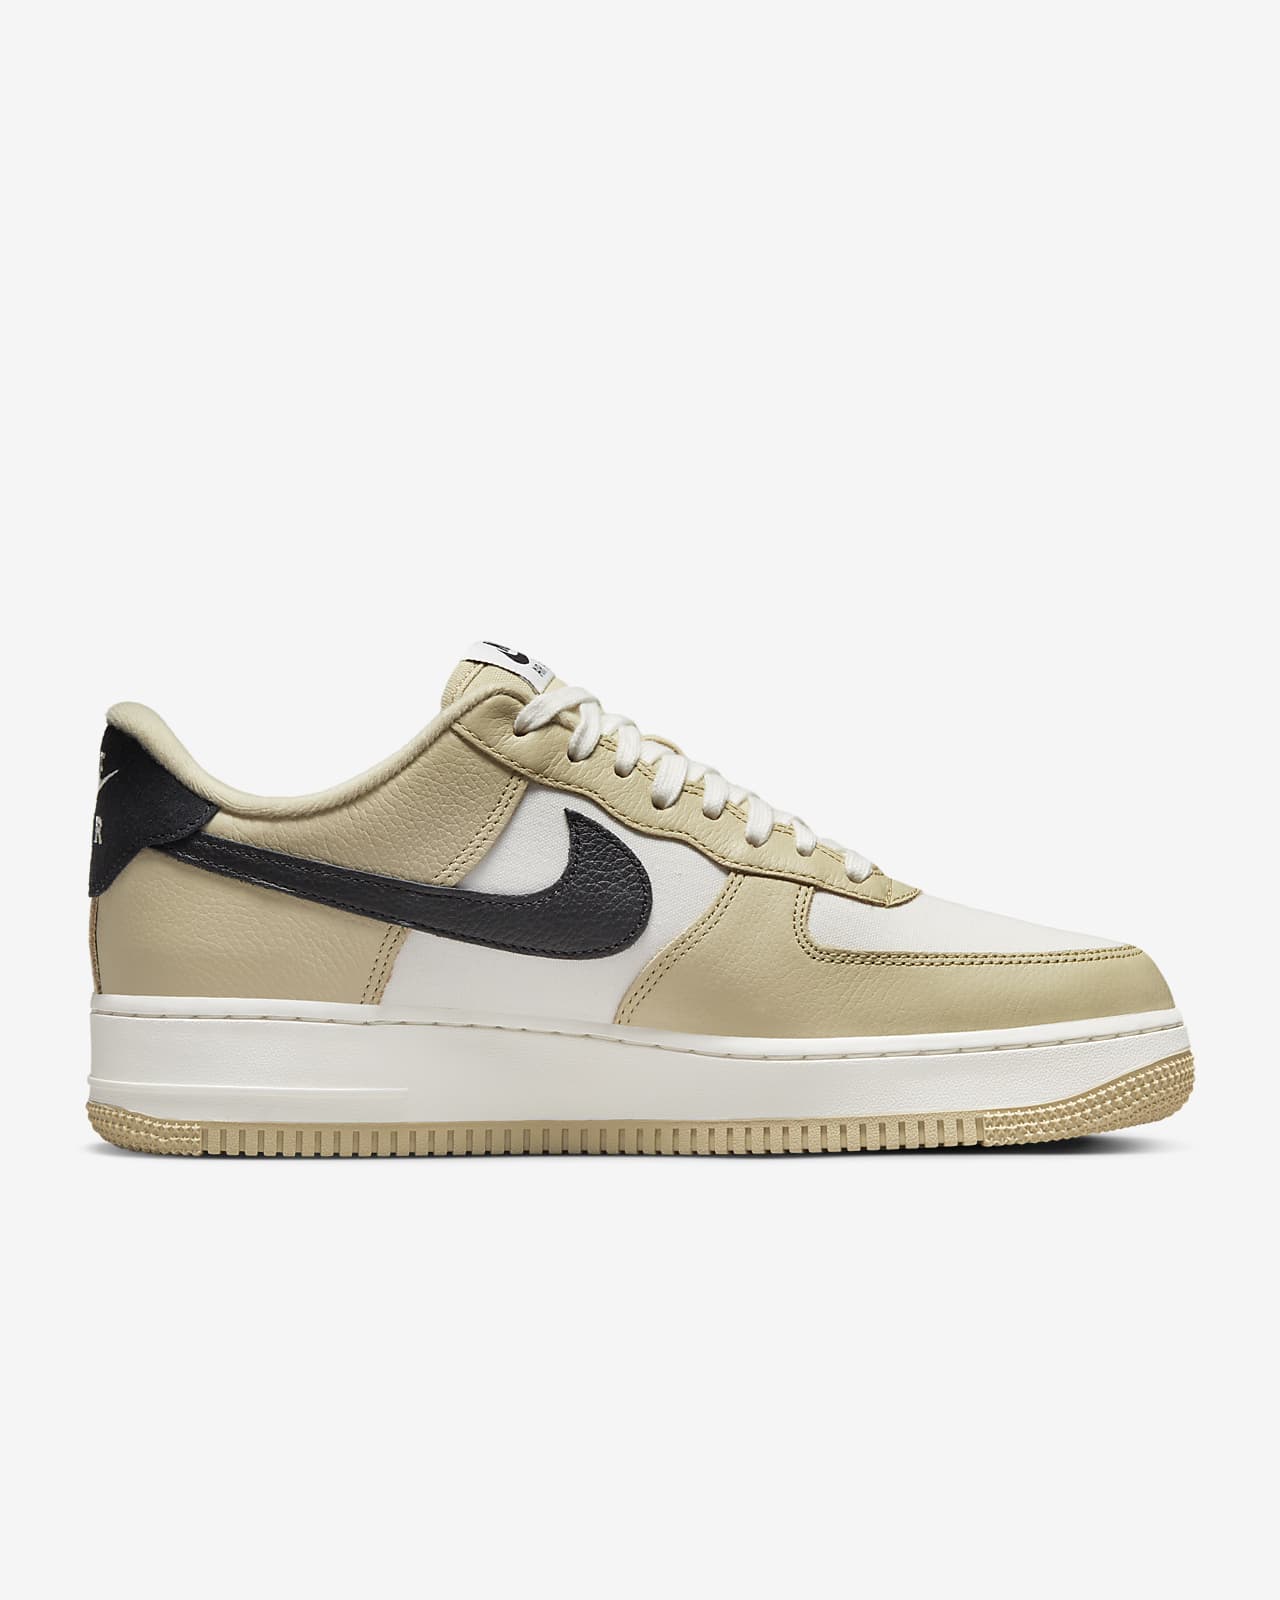 Nike Air Force 1 '07 LX Men's Shoes.